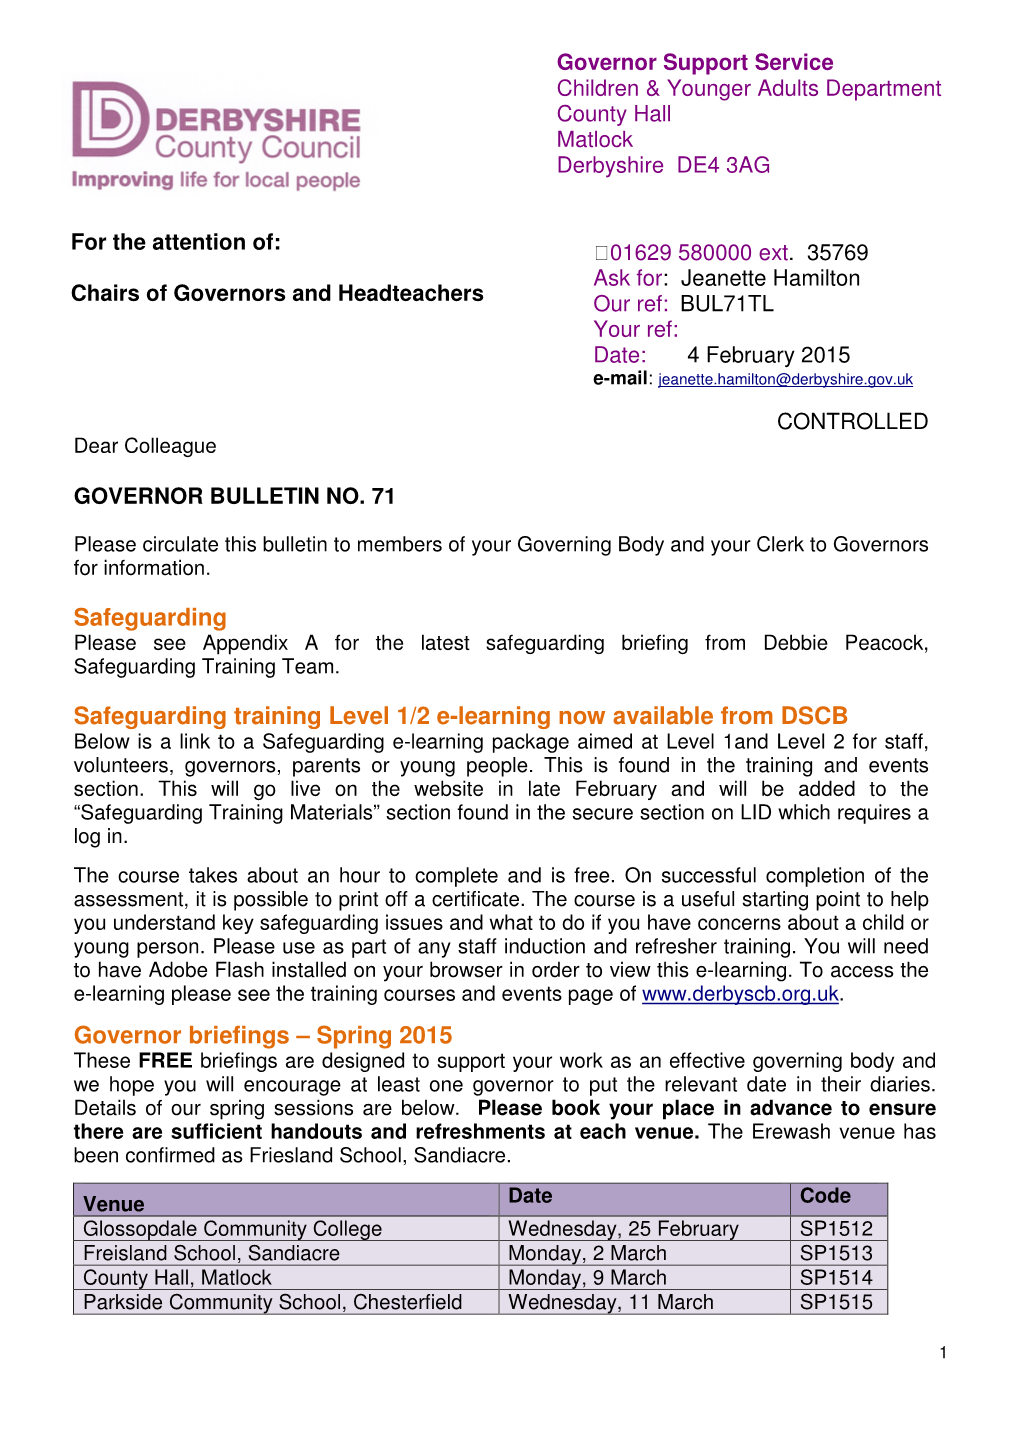 Safeguarding Safeguarding Training Level 1/2 E-Learning Now Available from DSCB Governor Briefings – Spring 2015